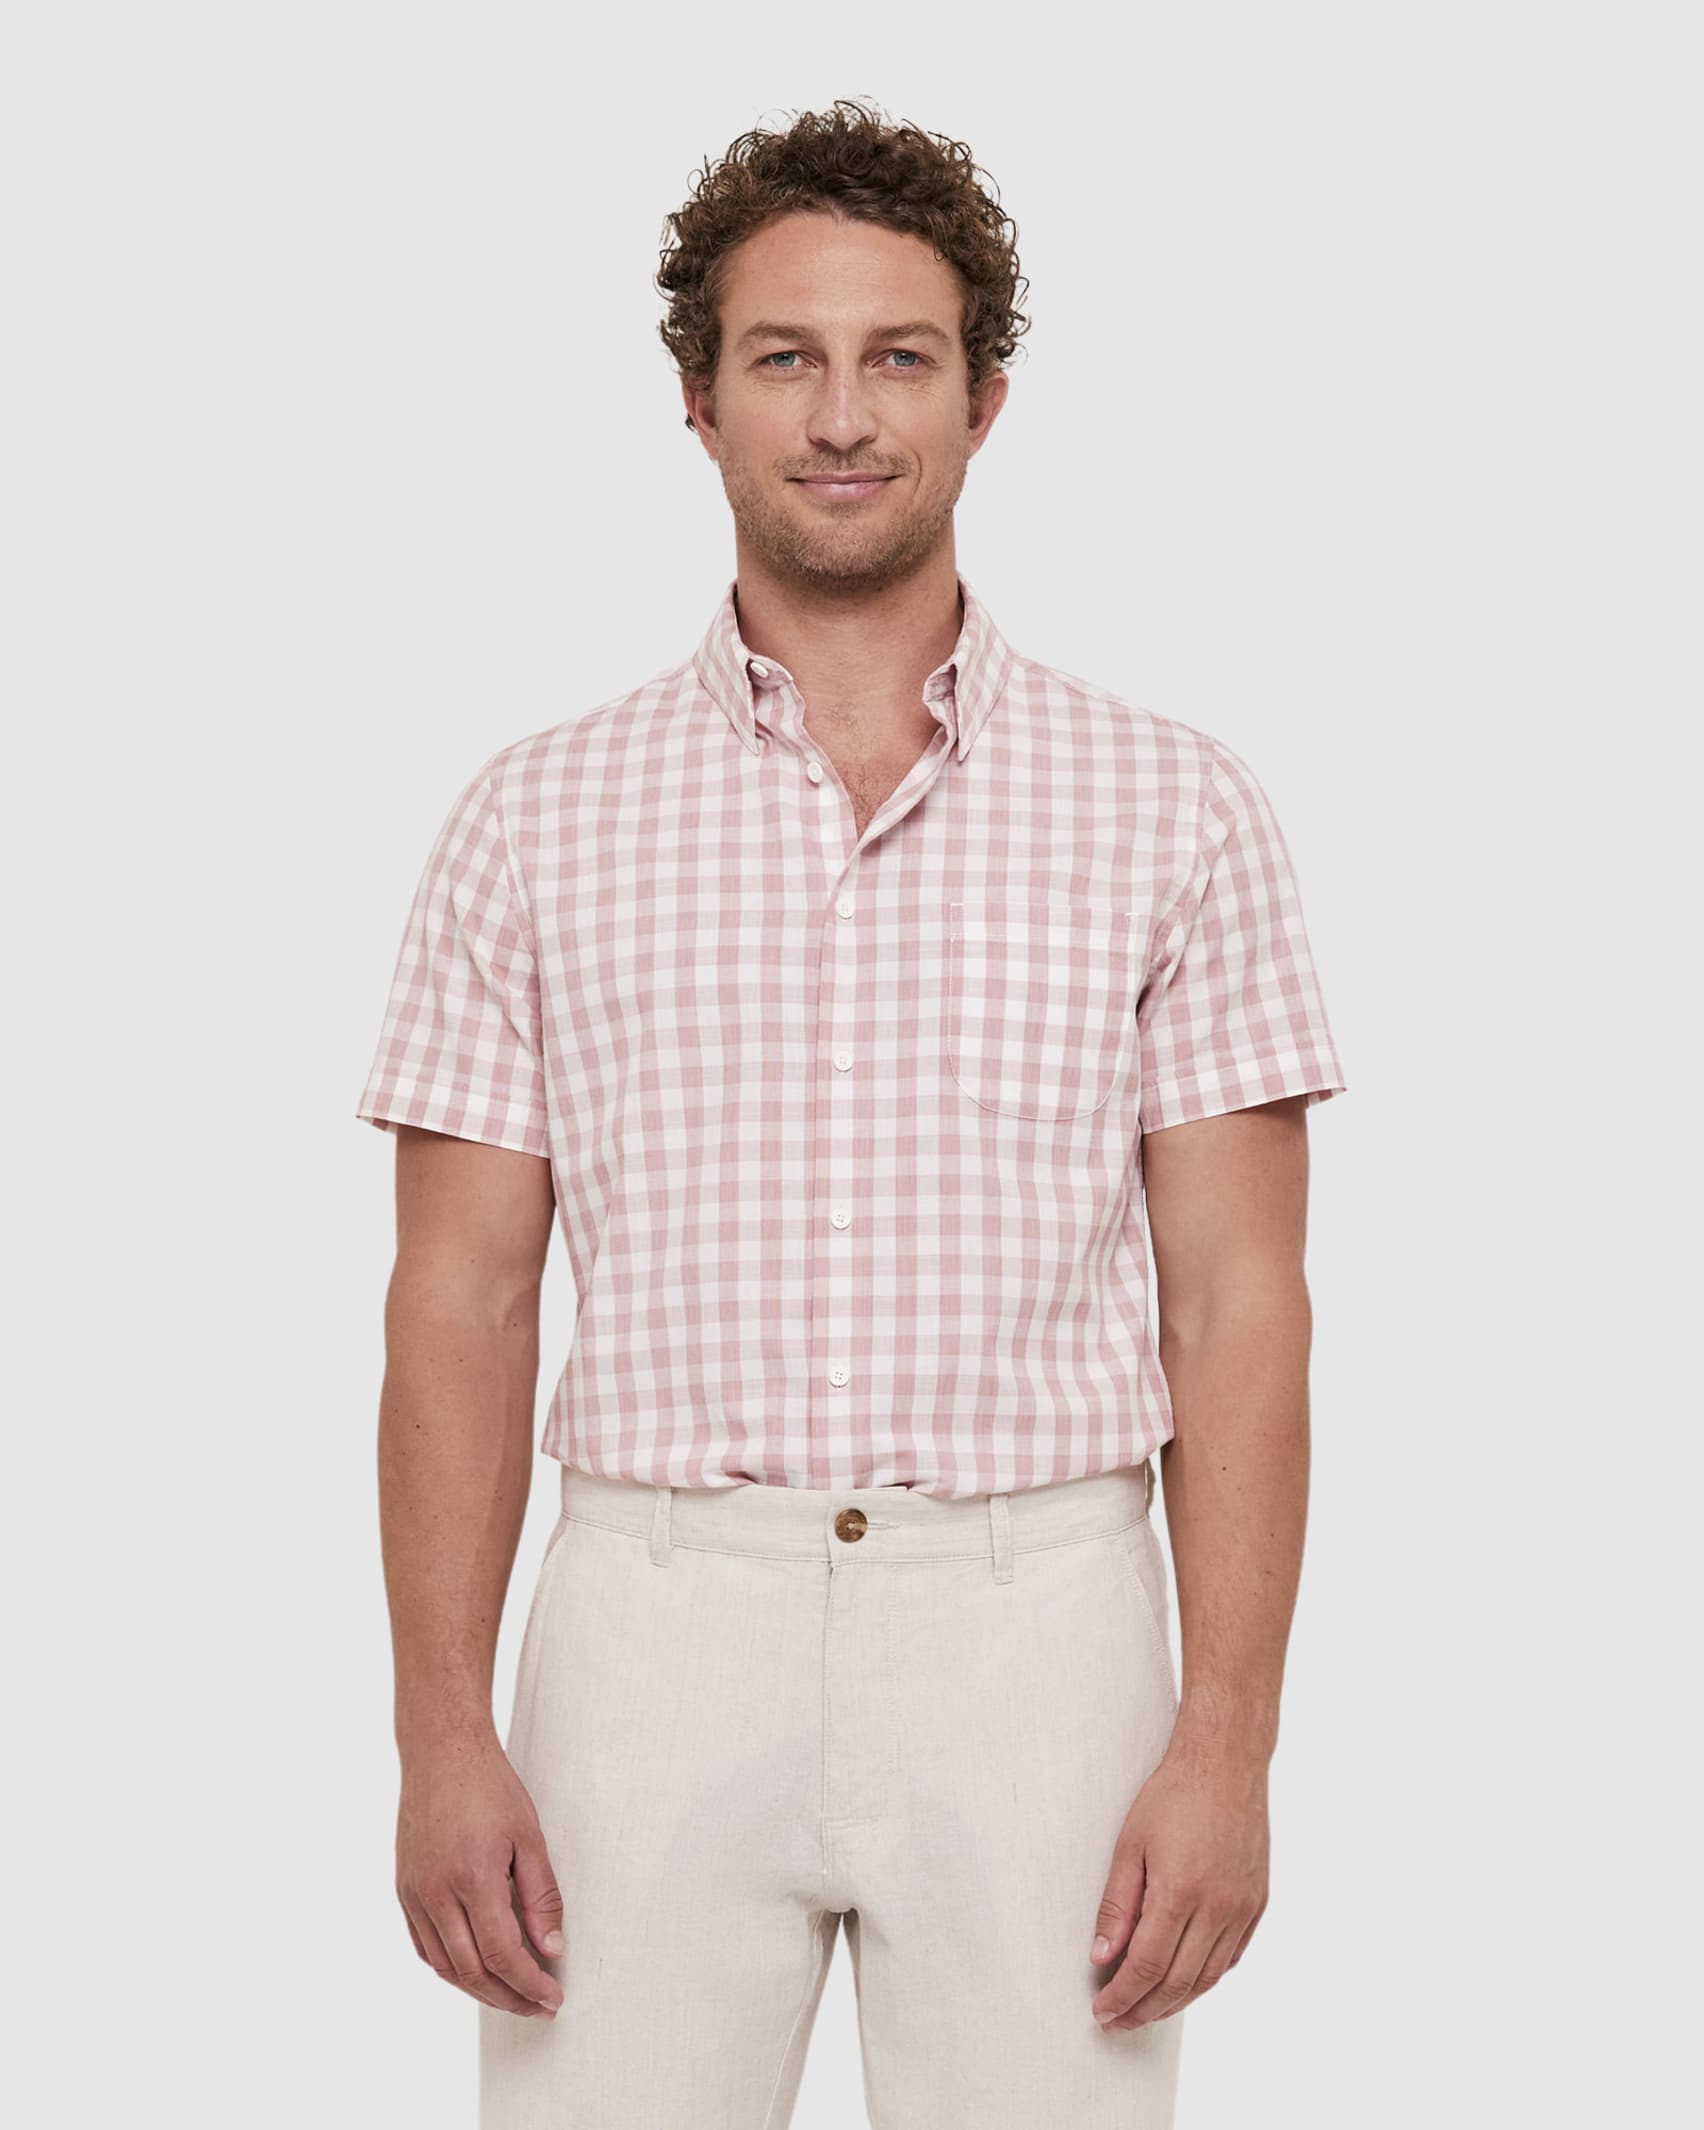 Penfield Short Sleeve Shirt in PINK/WHITE